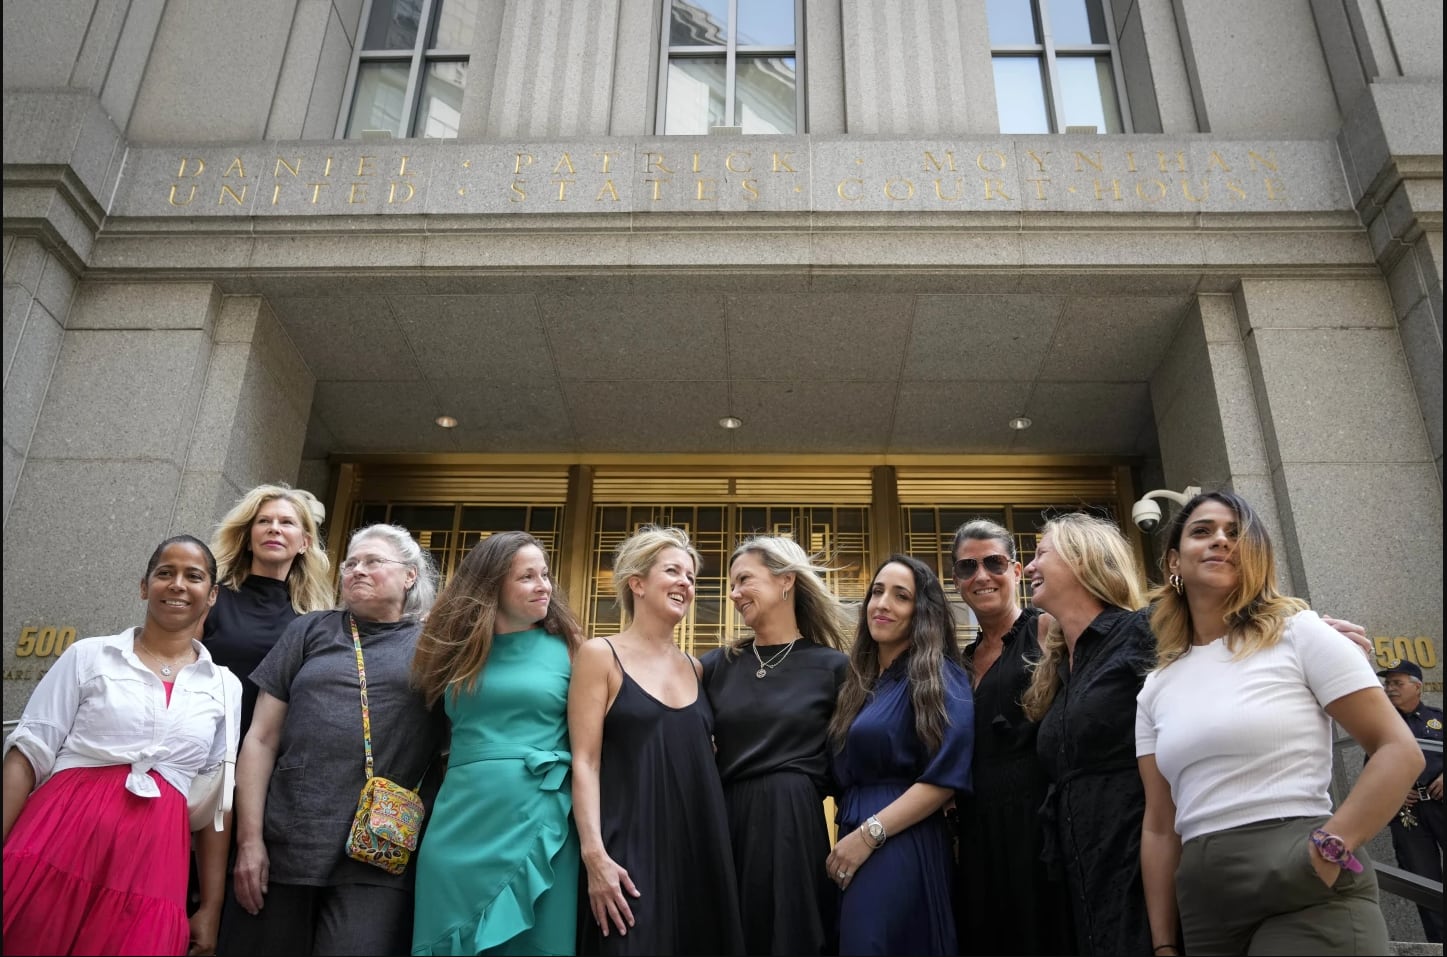 Dr. Robert Hadden's victims stand before a federal court on July 25, 2023. (AP/John Minchillo).